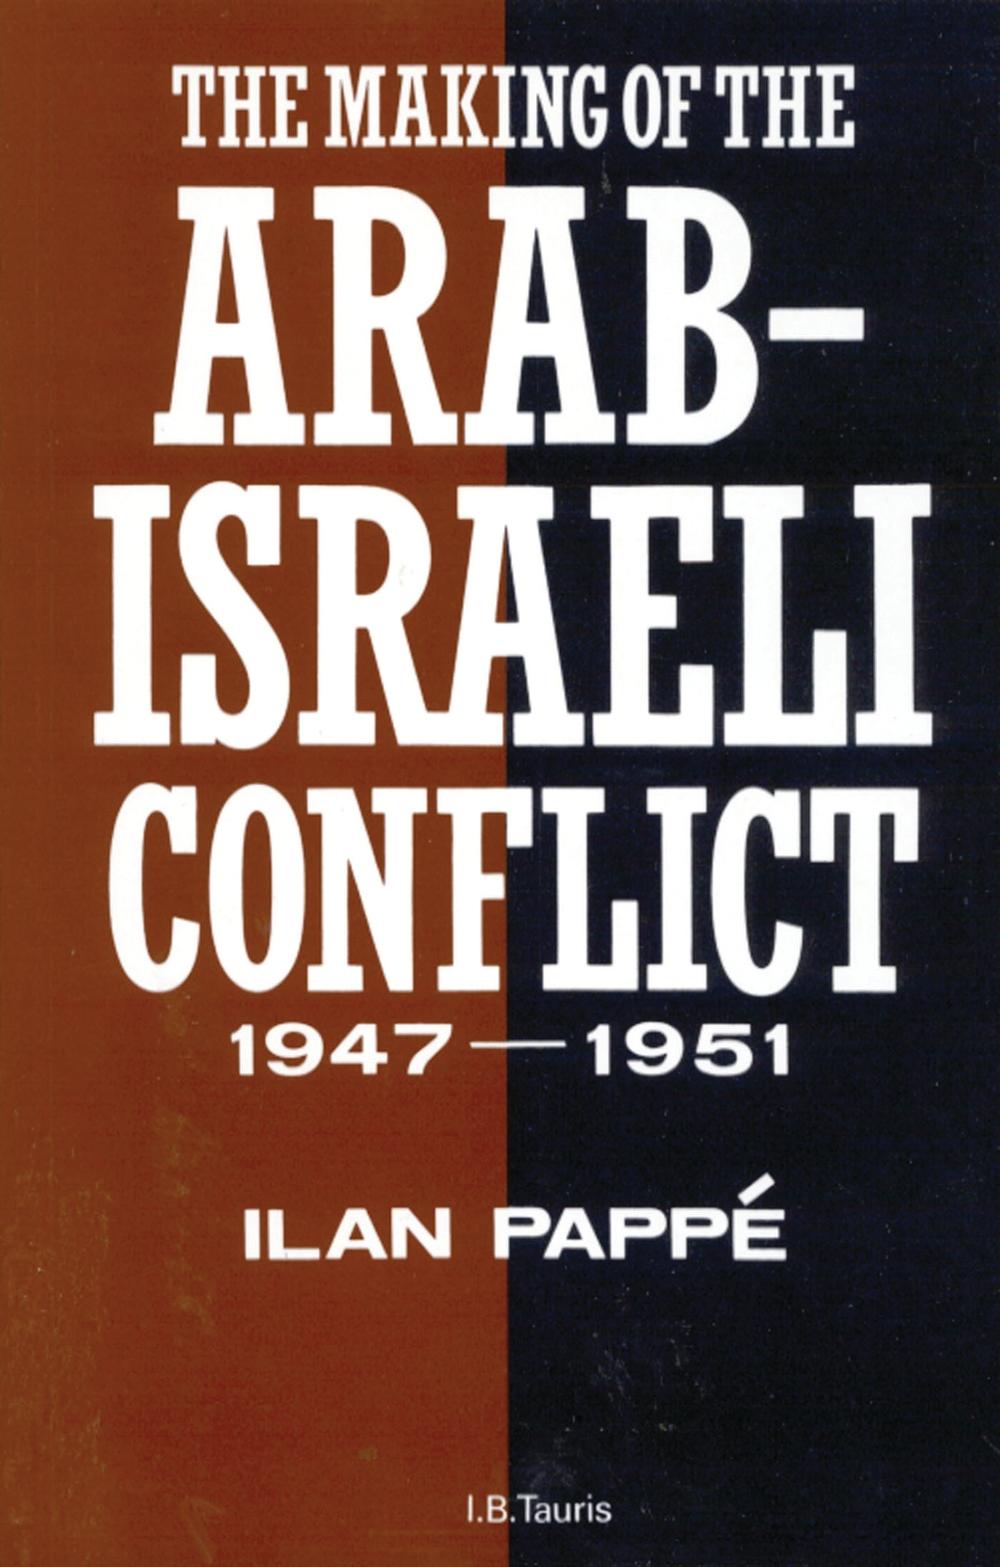 Making of the Arab-Israeli Conflict, 1947-1951